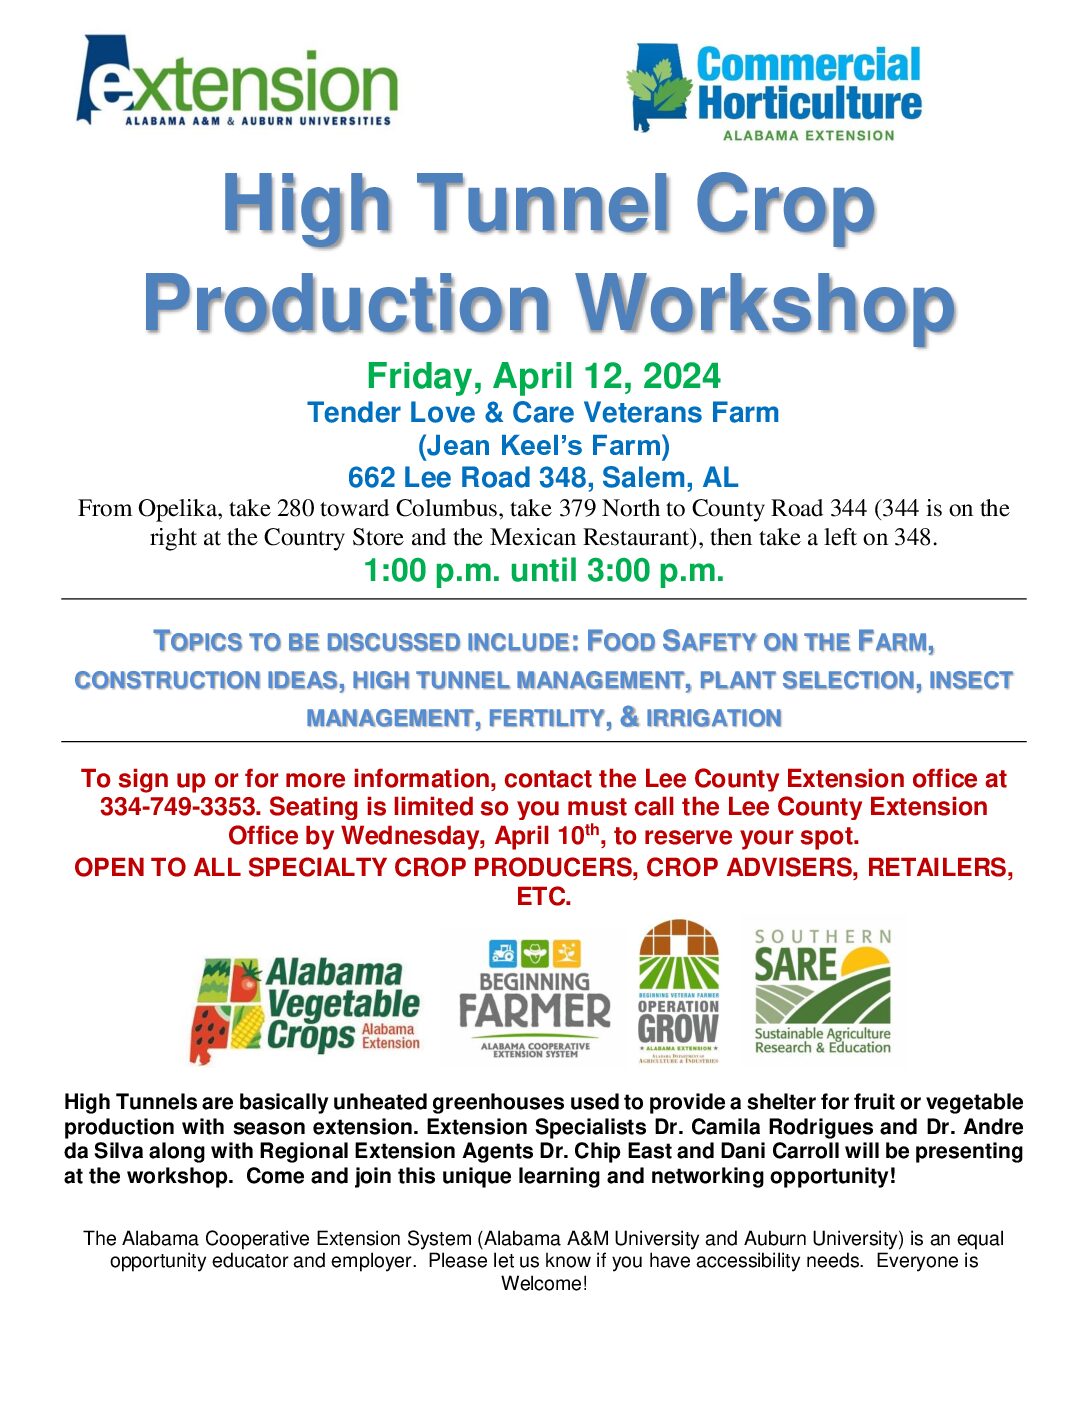 ACES to host workshop on high tunnel crop growing